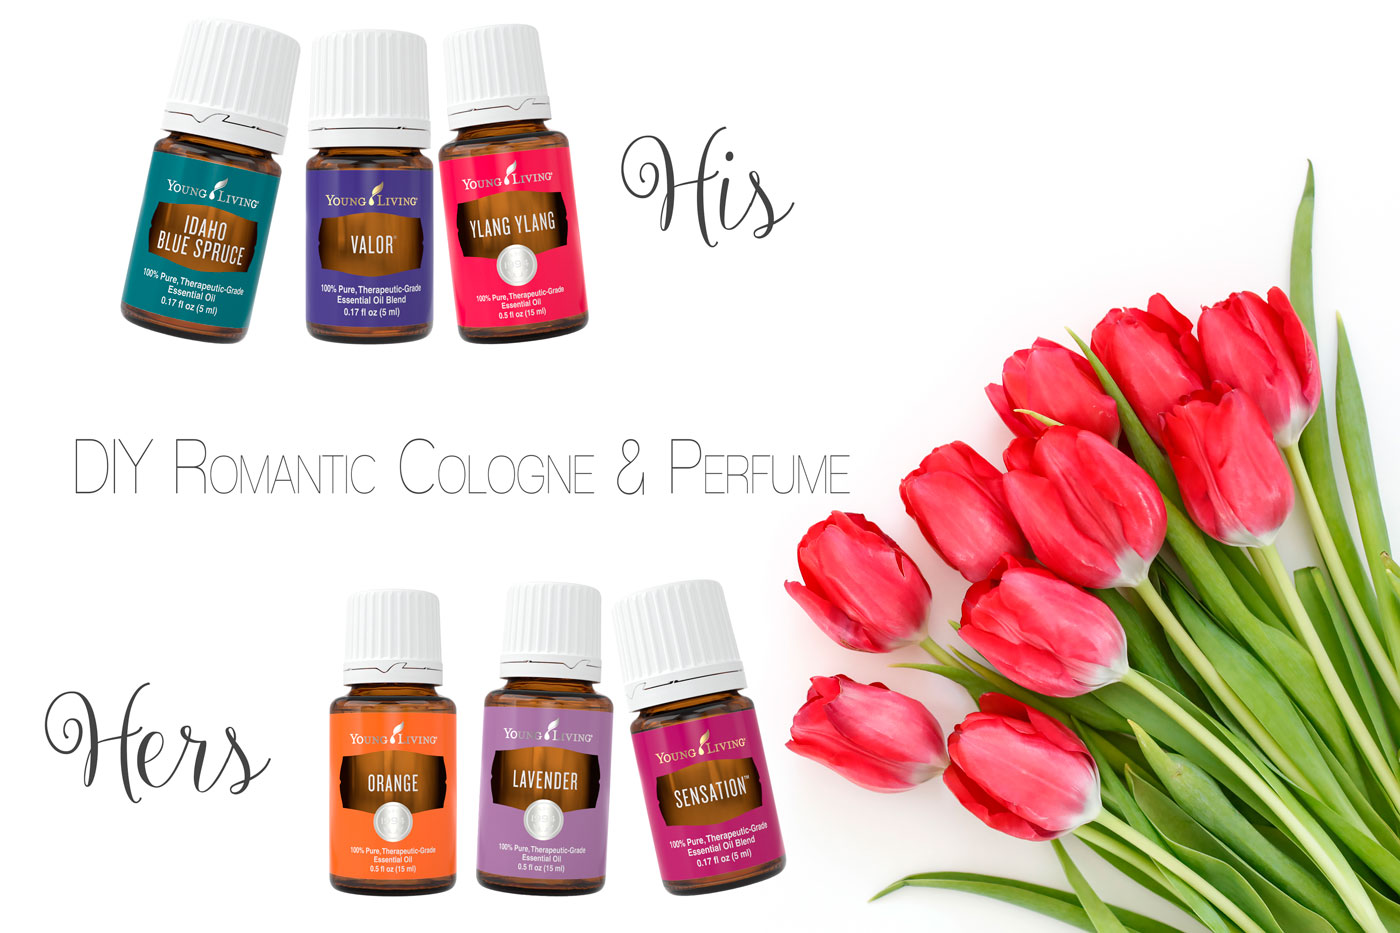 DIY Romantic HIS & HERS Cologne & Perfume with Essential Oils (3)